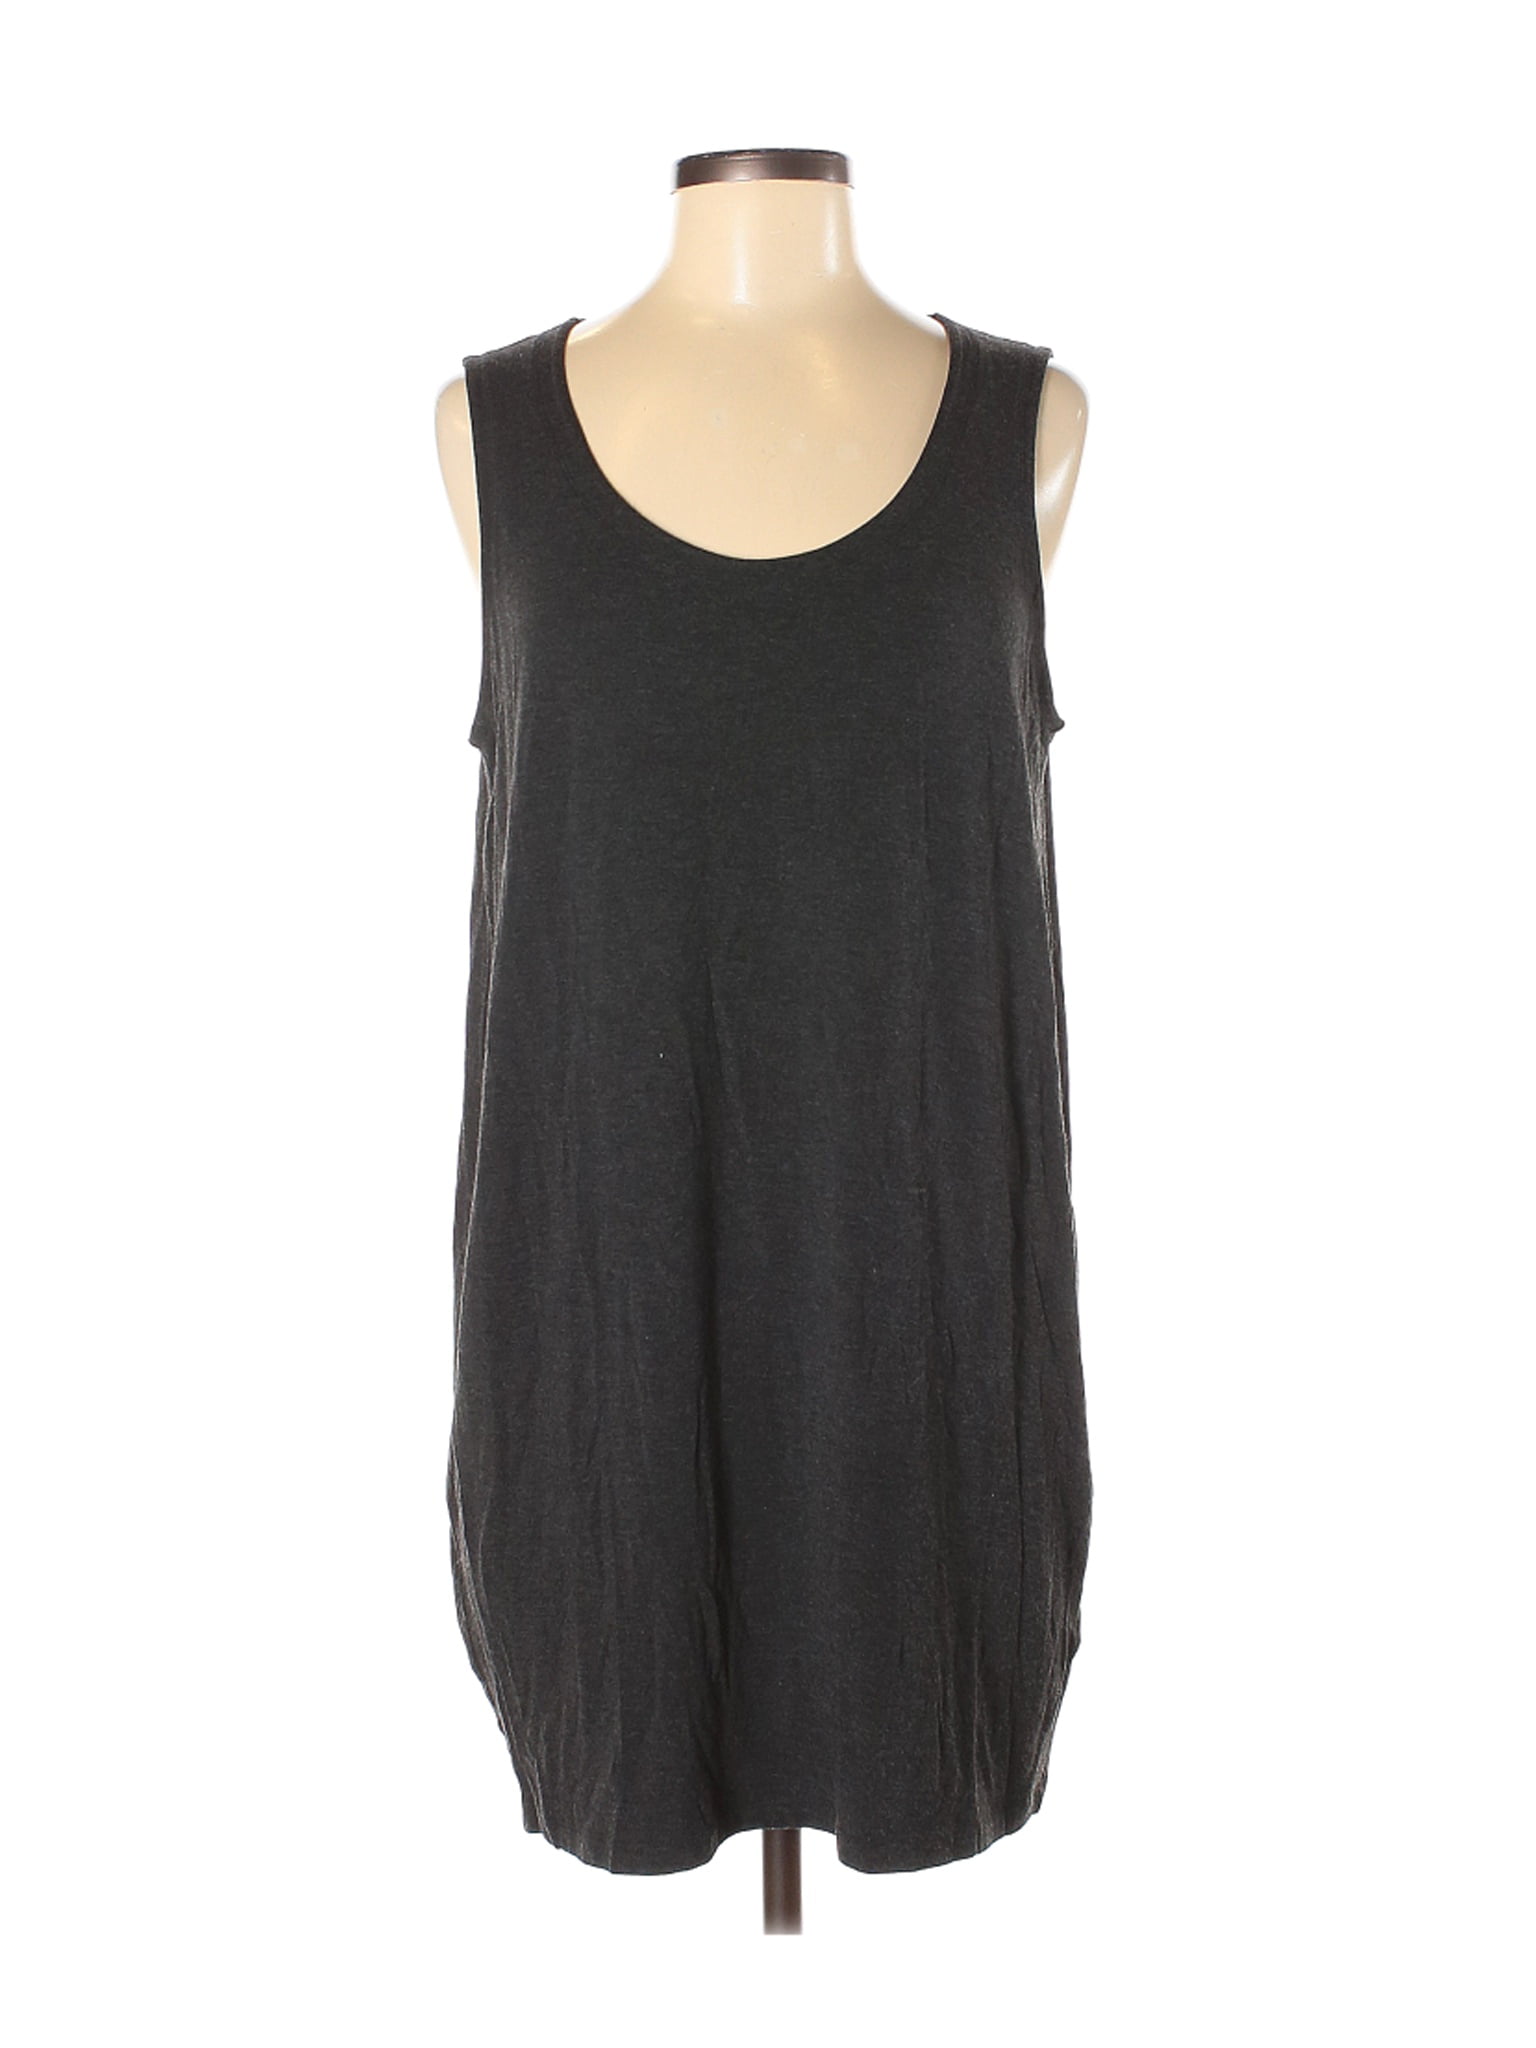 Eileen Fisher - Pre-Owned Eileen Fisher Women's Size M Sleeveless T ...